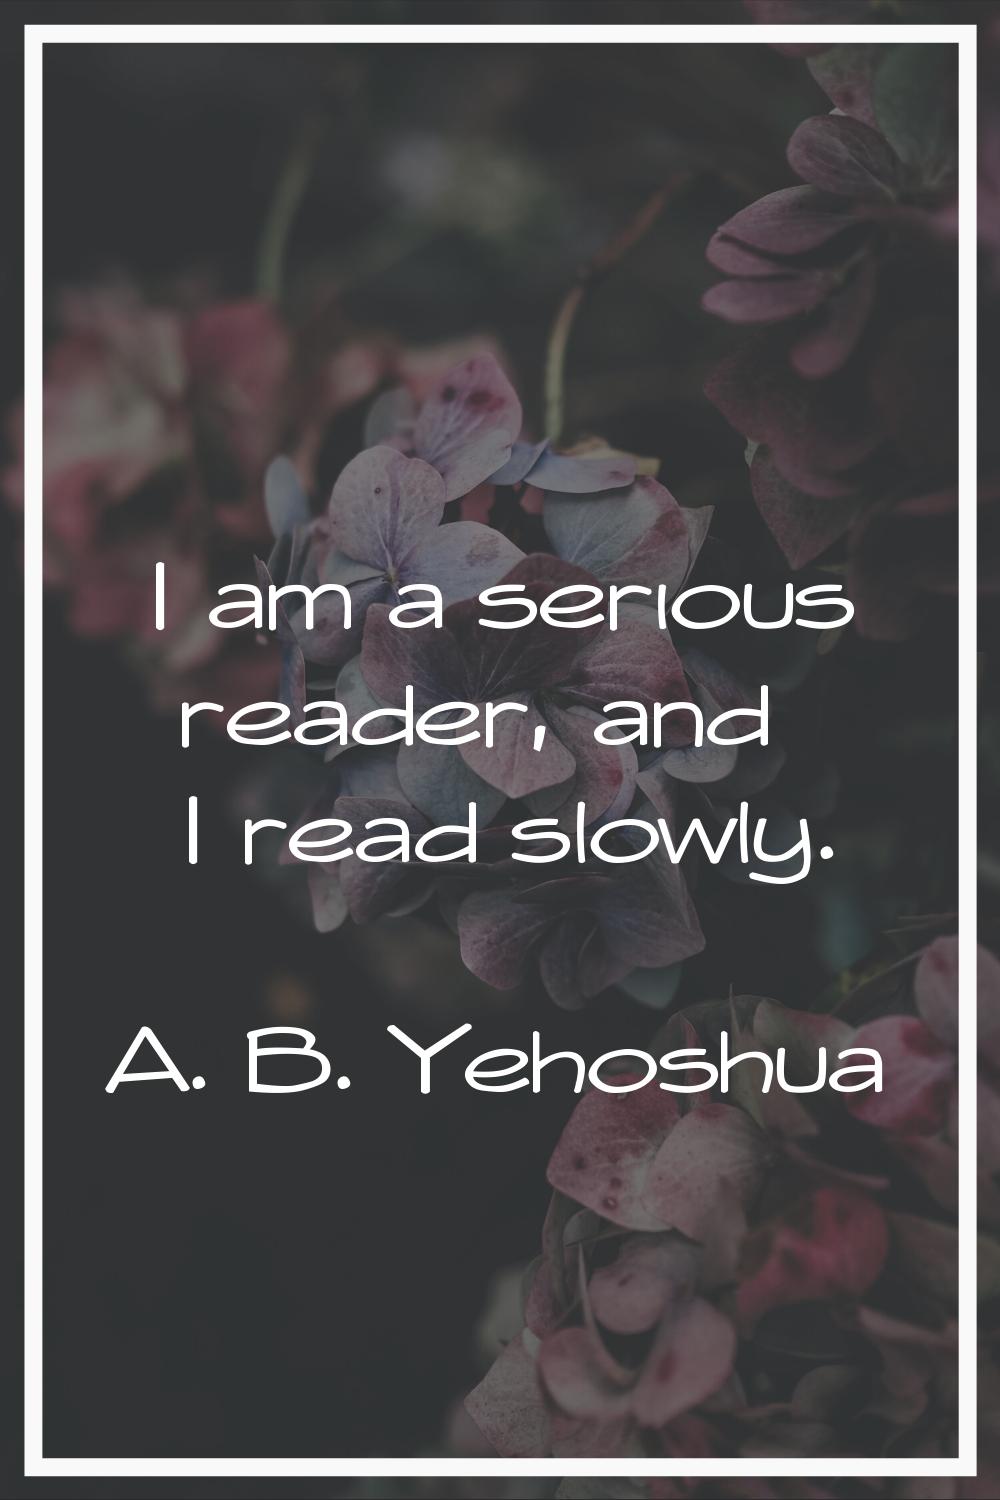 I am a serious reader, and I read slowly.